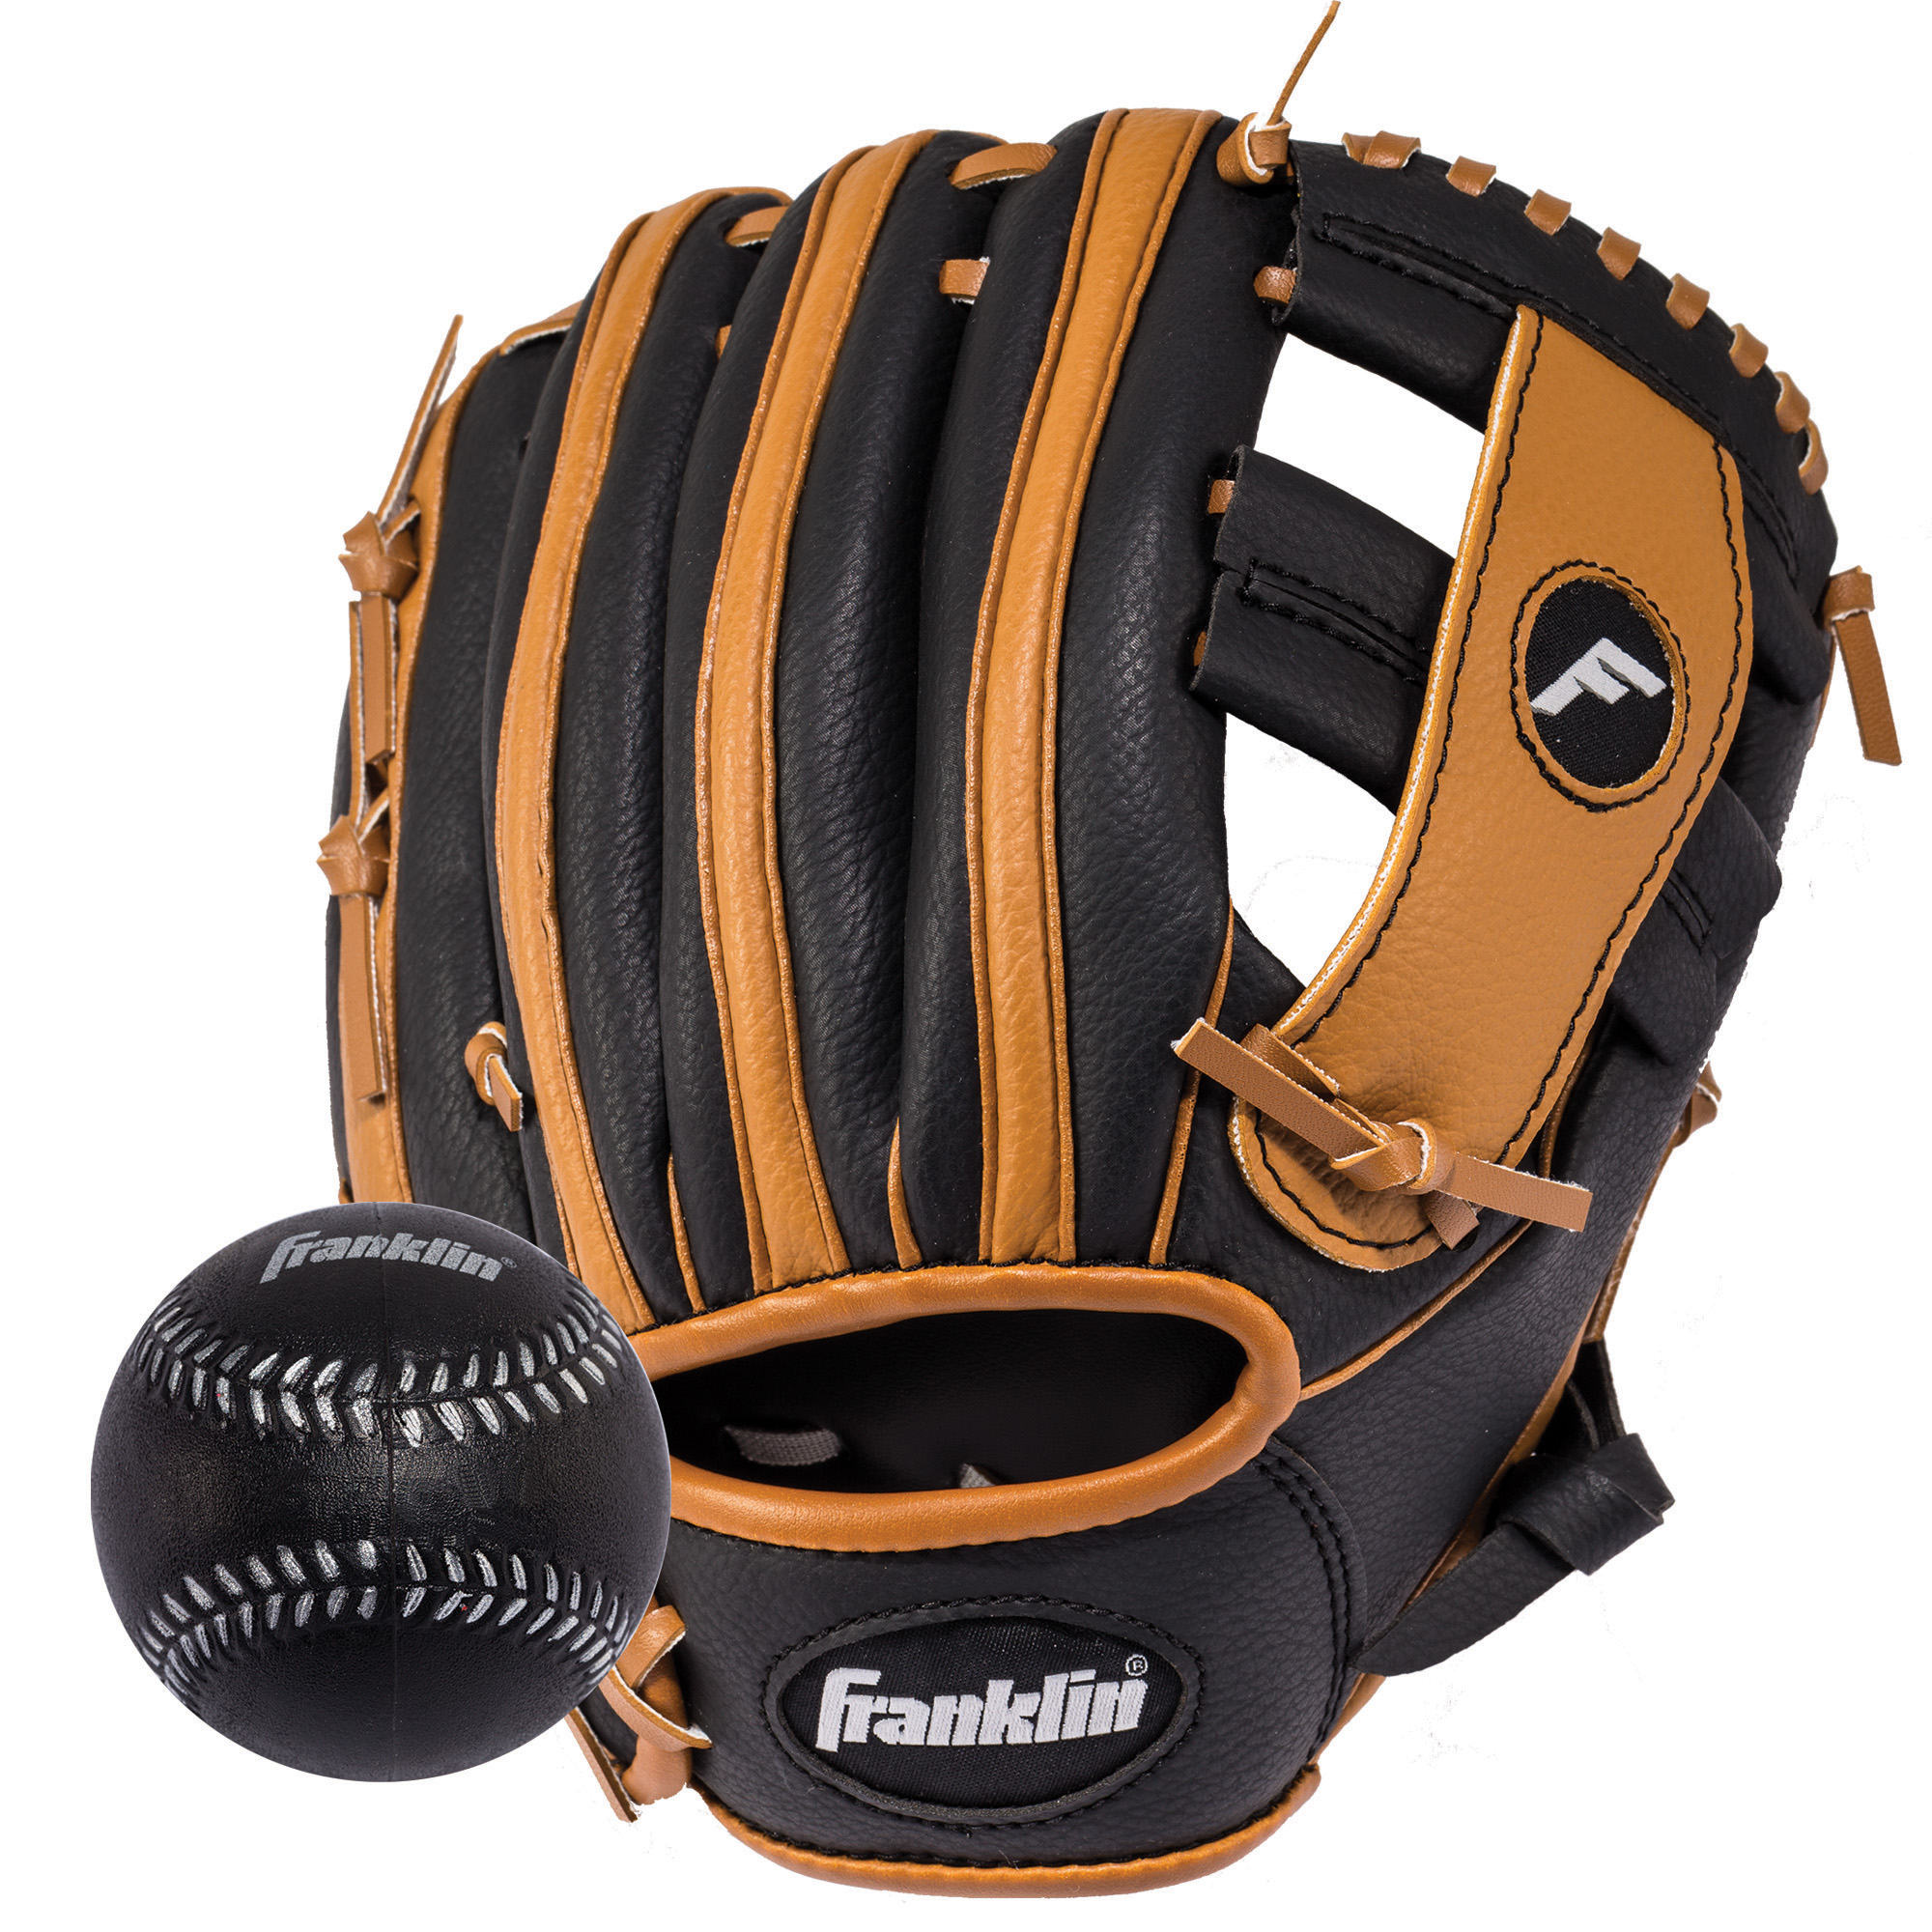 Franklin Sports 9.5 In. RTP Series Baseball Glove, Right Hand Throw, with Ball - image 1 of 4